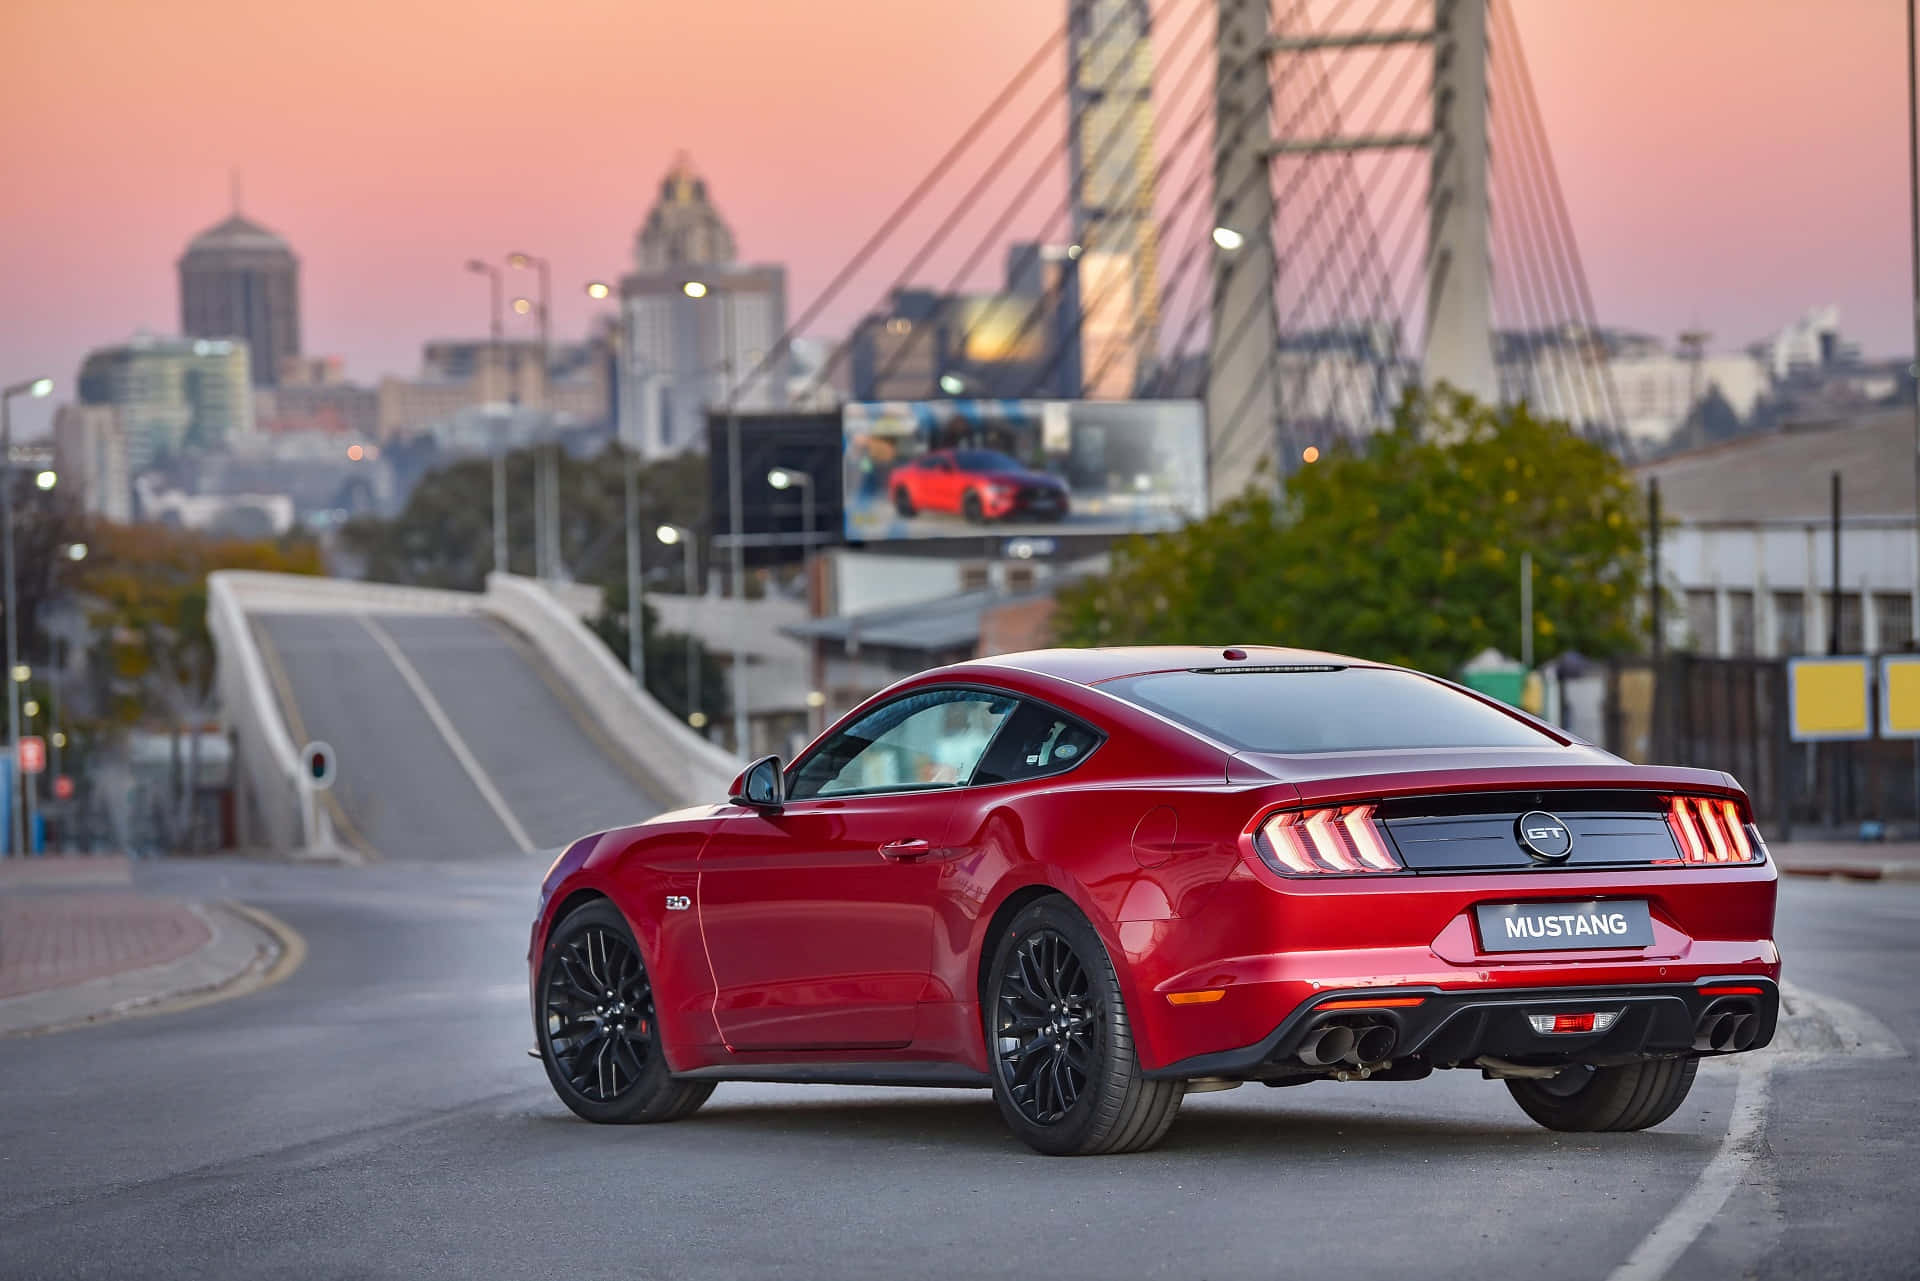 Feel the speed with the iconic Ford Mustang